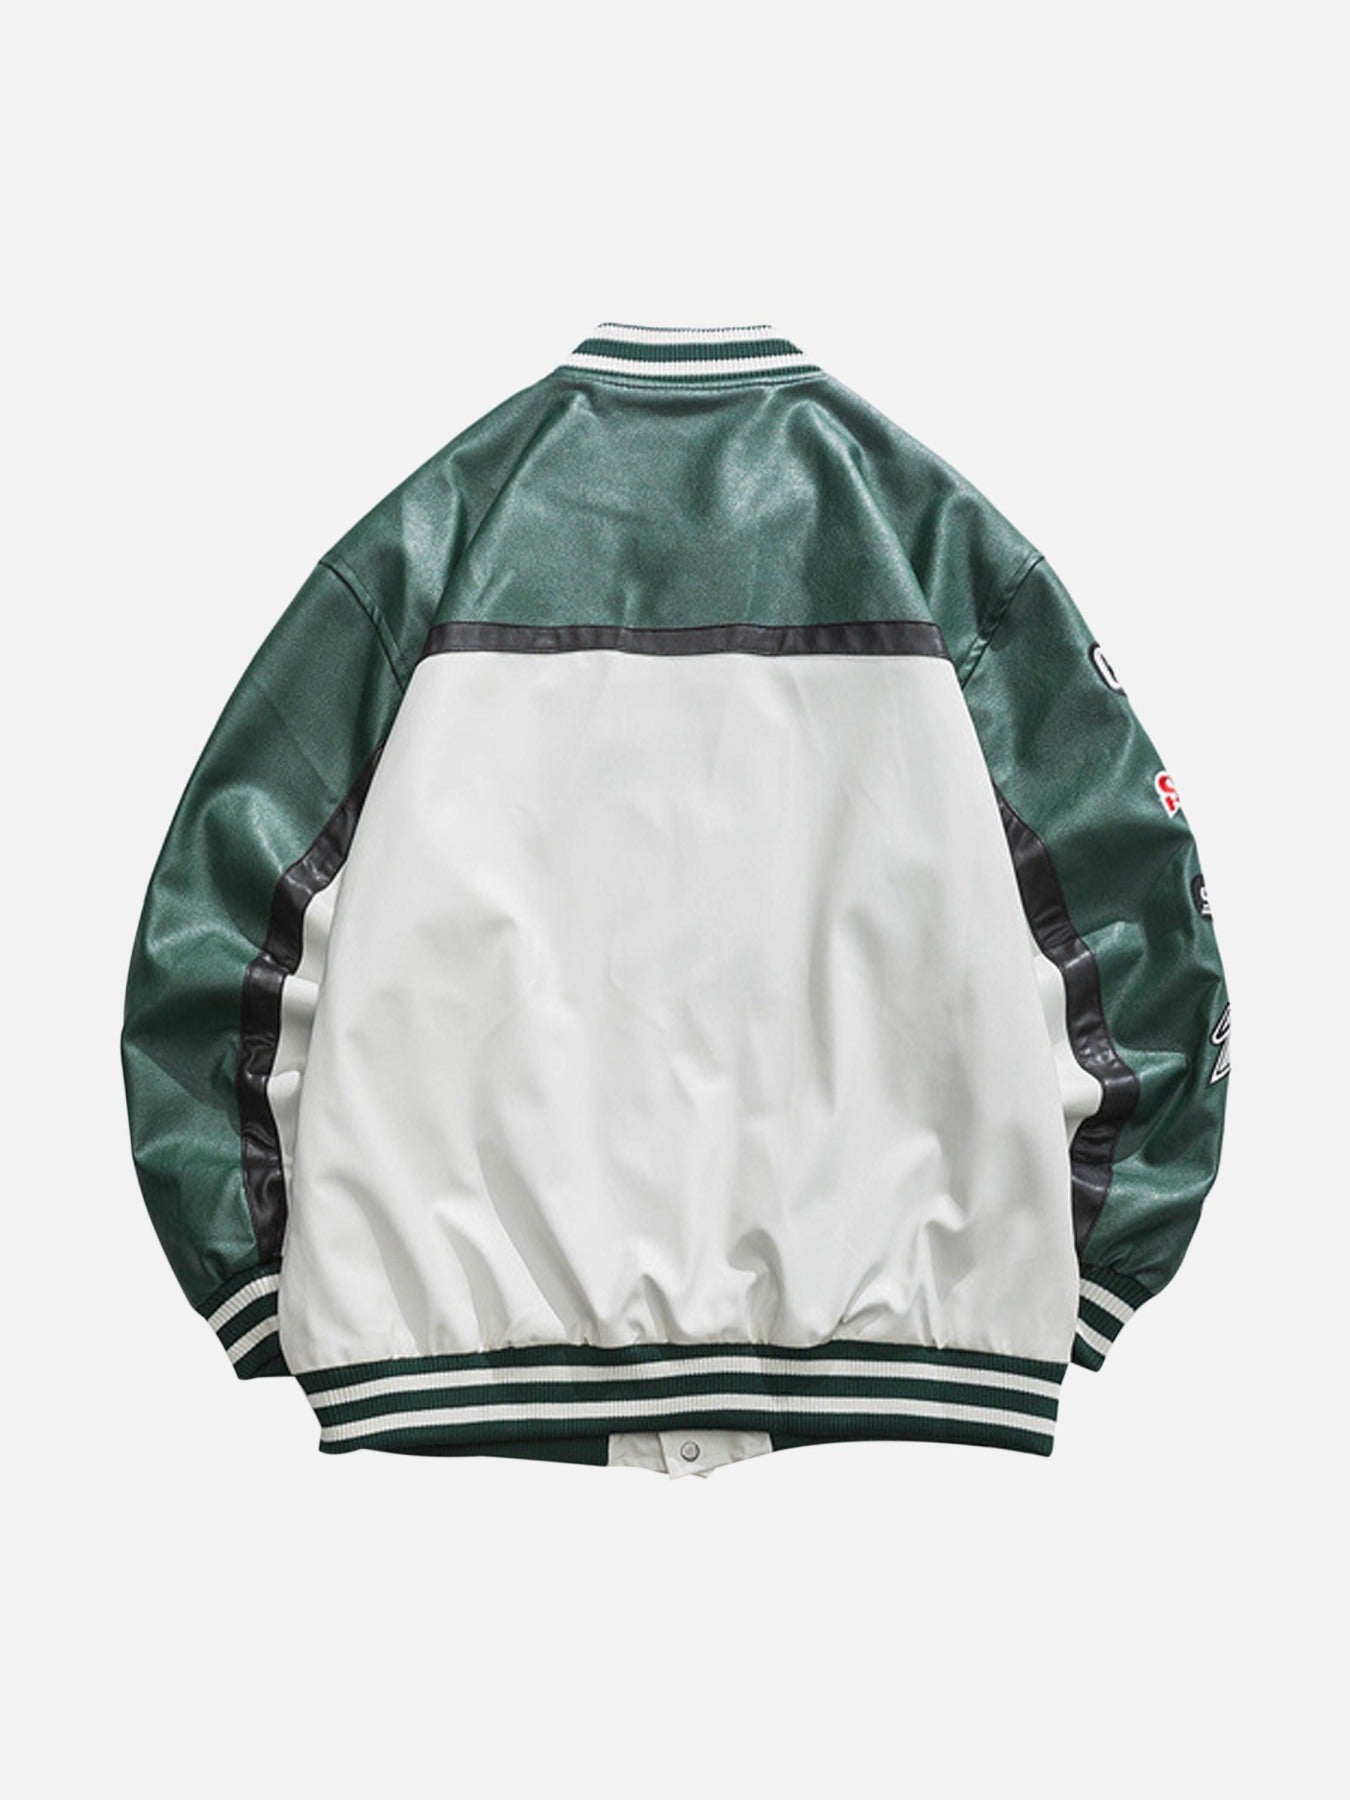 The Supermade Color Blocking Embroidery Jacket